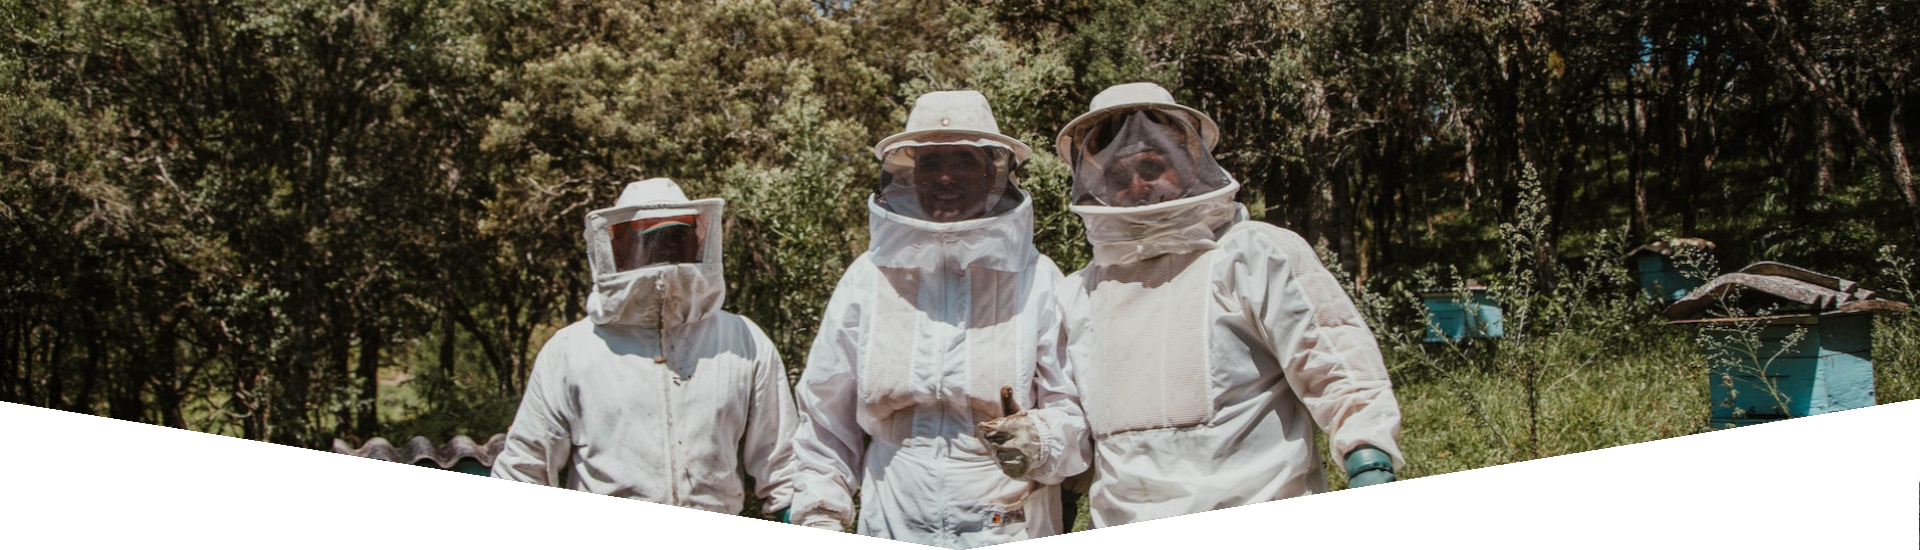 BEE KEEPER PROTECTIVE CLOTHING